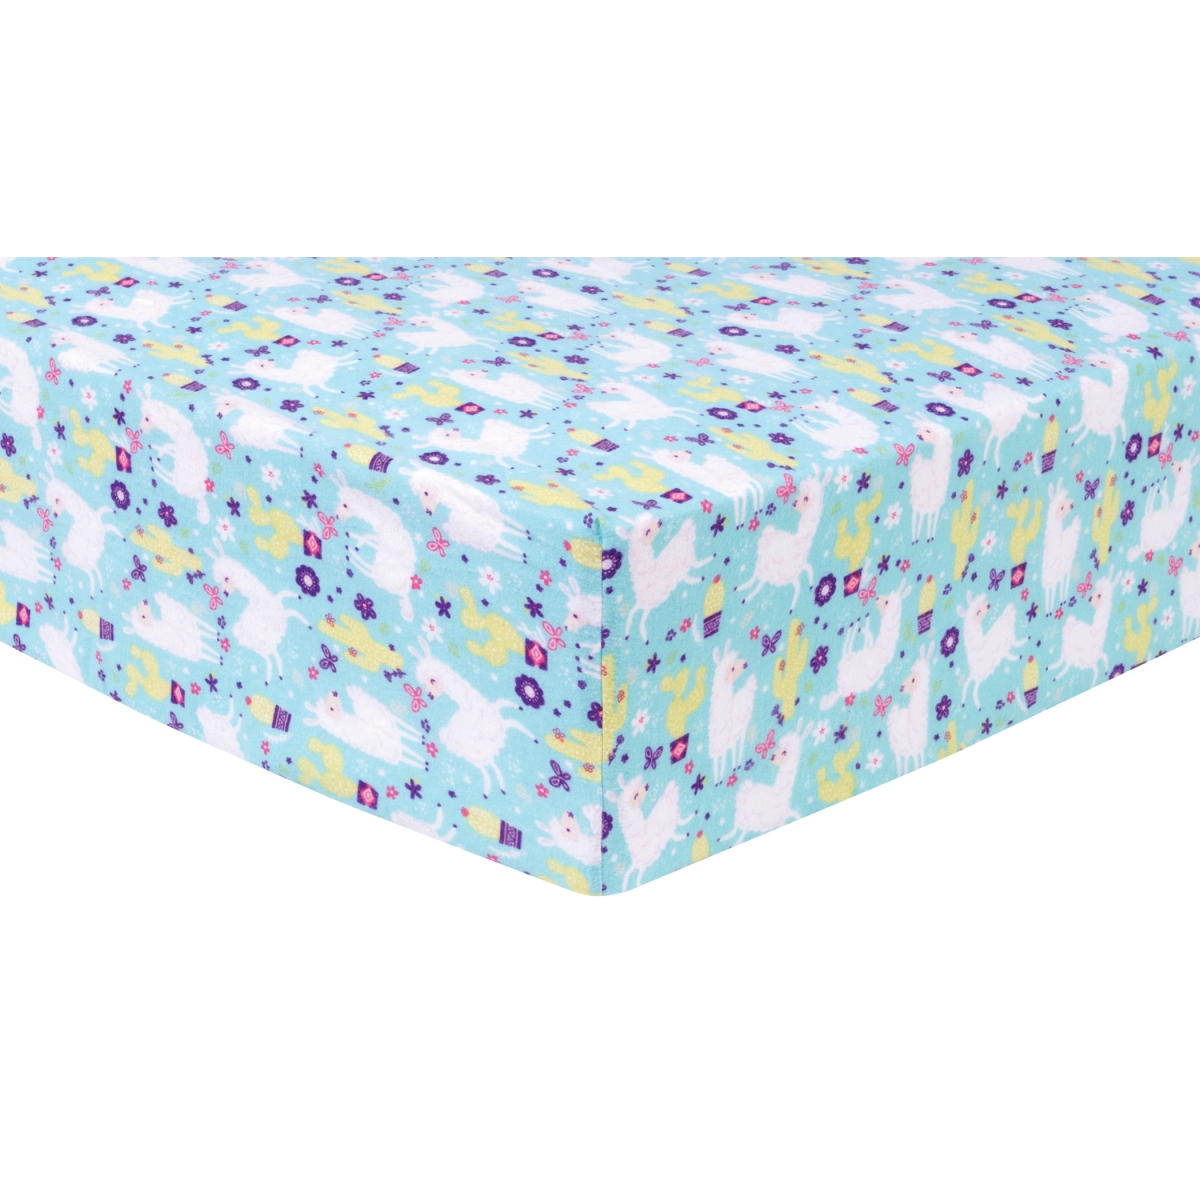 103169 28 X 52 In. Llama Paradise Deluxe Flannel Fitted Crib Sheet - Assorted Color